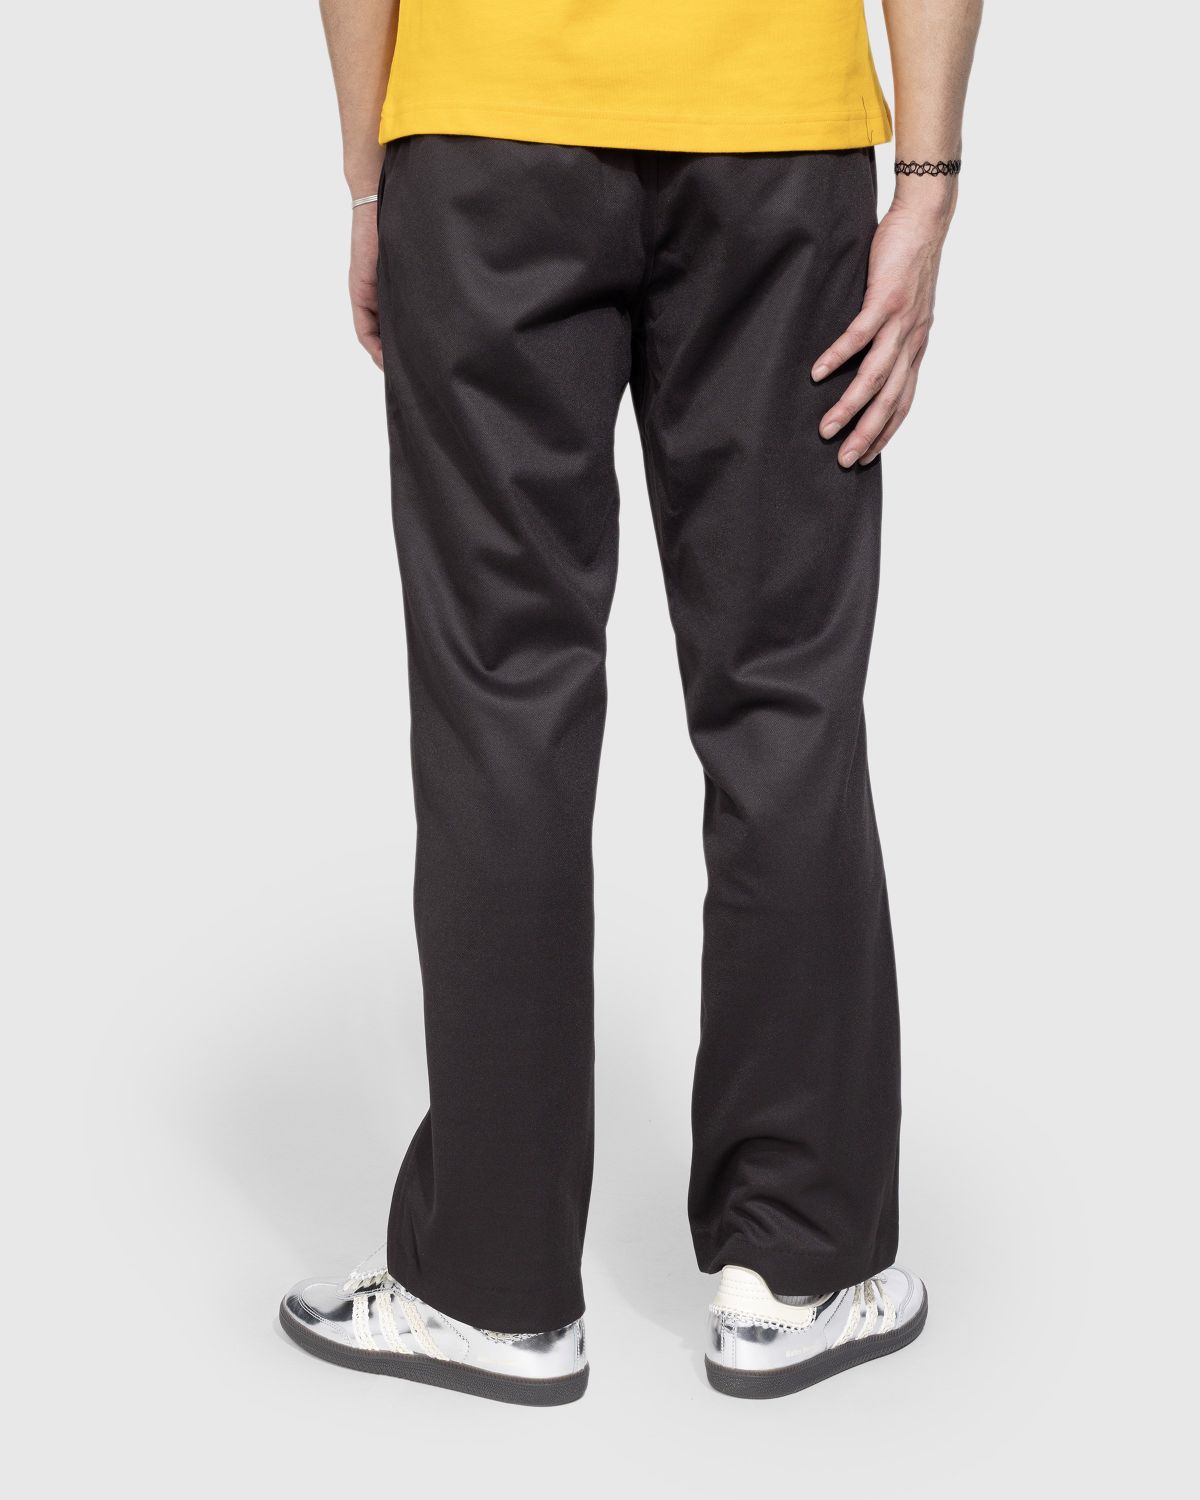 Adidas x Wales Bonner – Flared Trousers Night Brown - Pants - Brown - Image 3